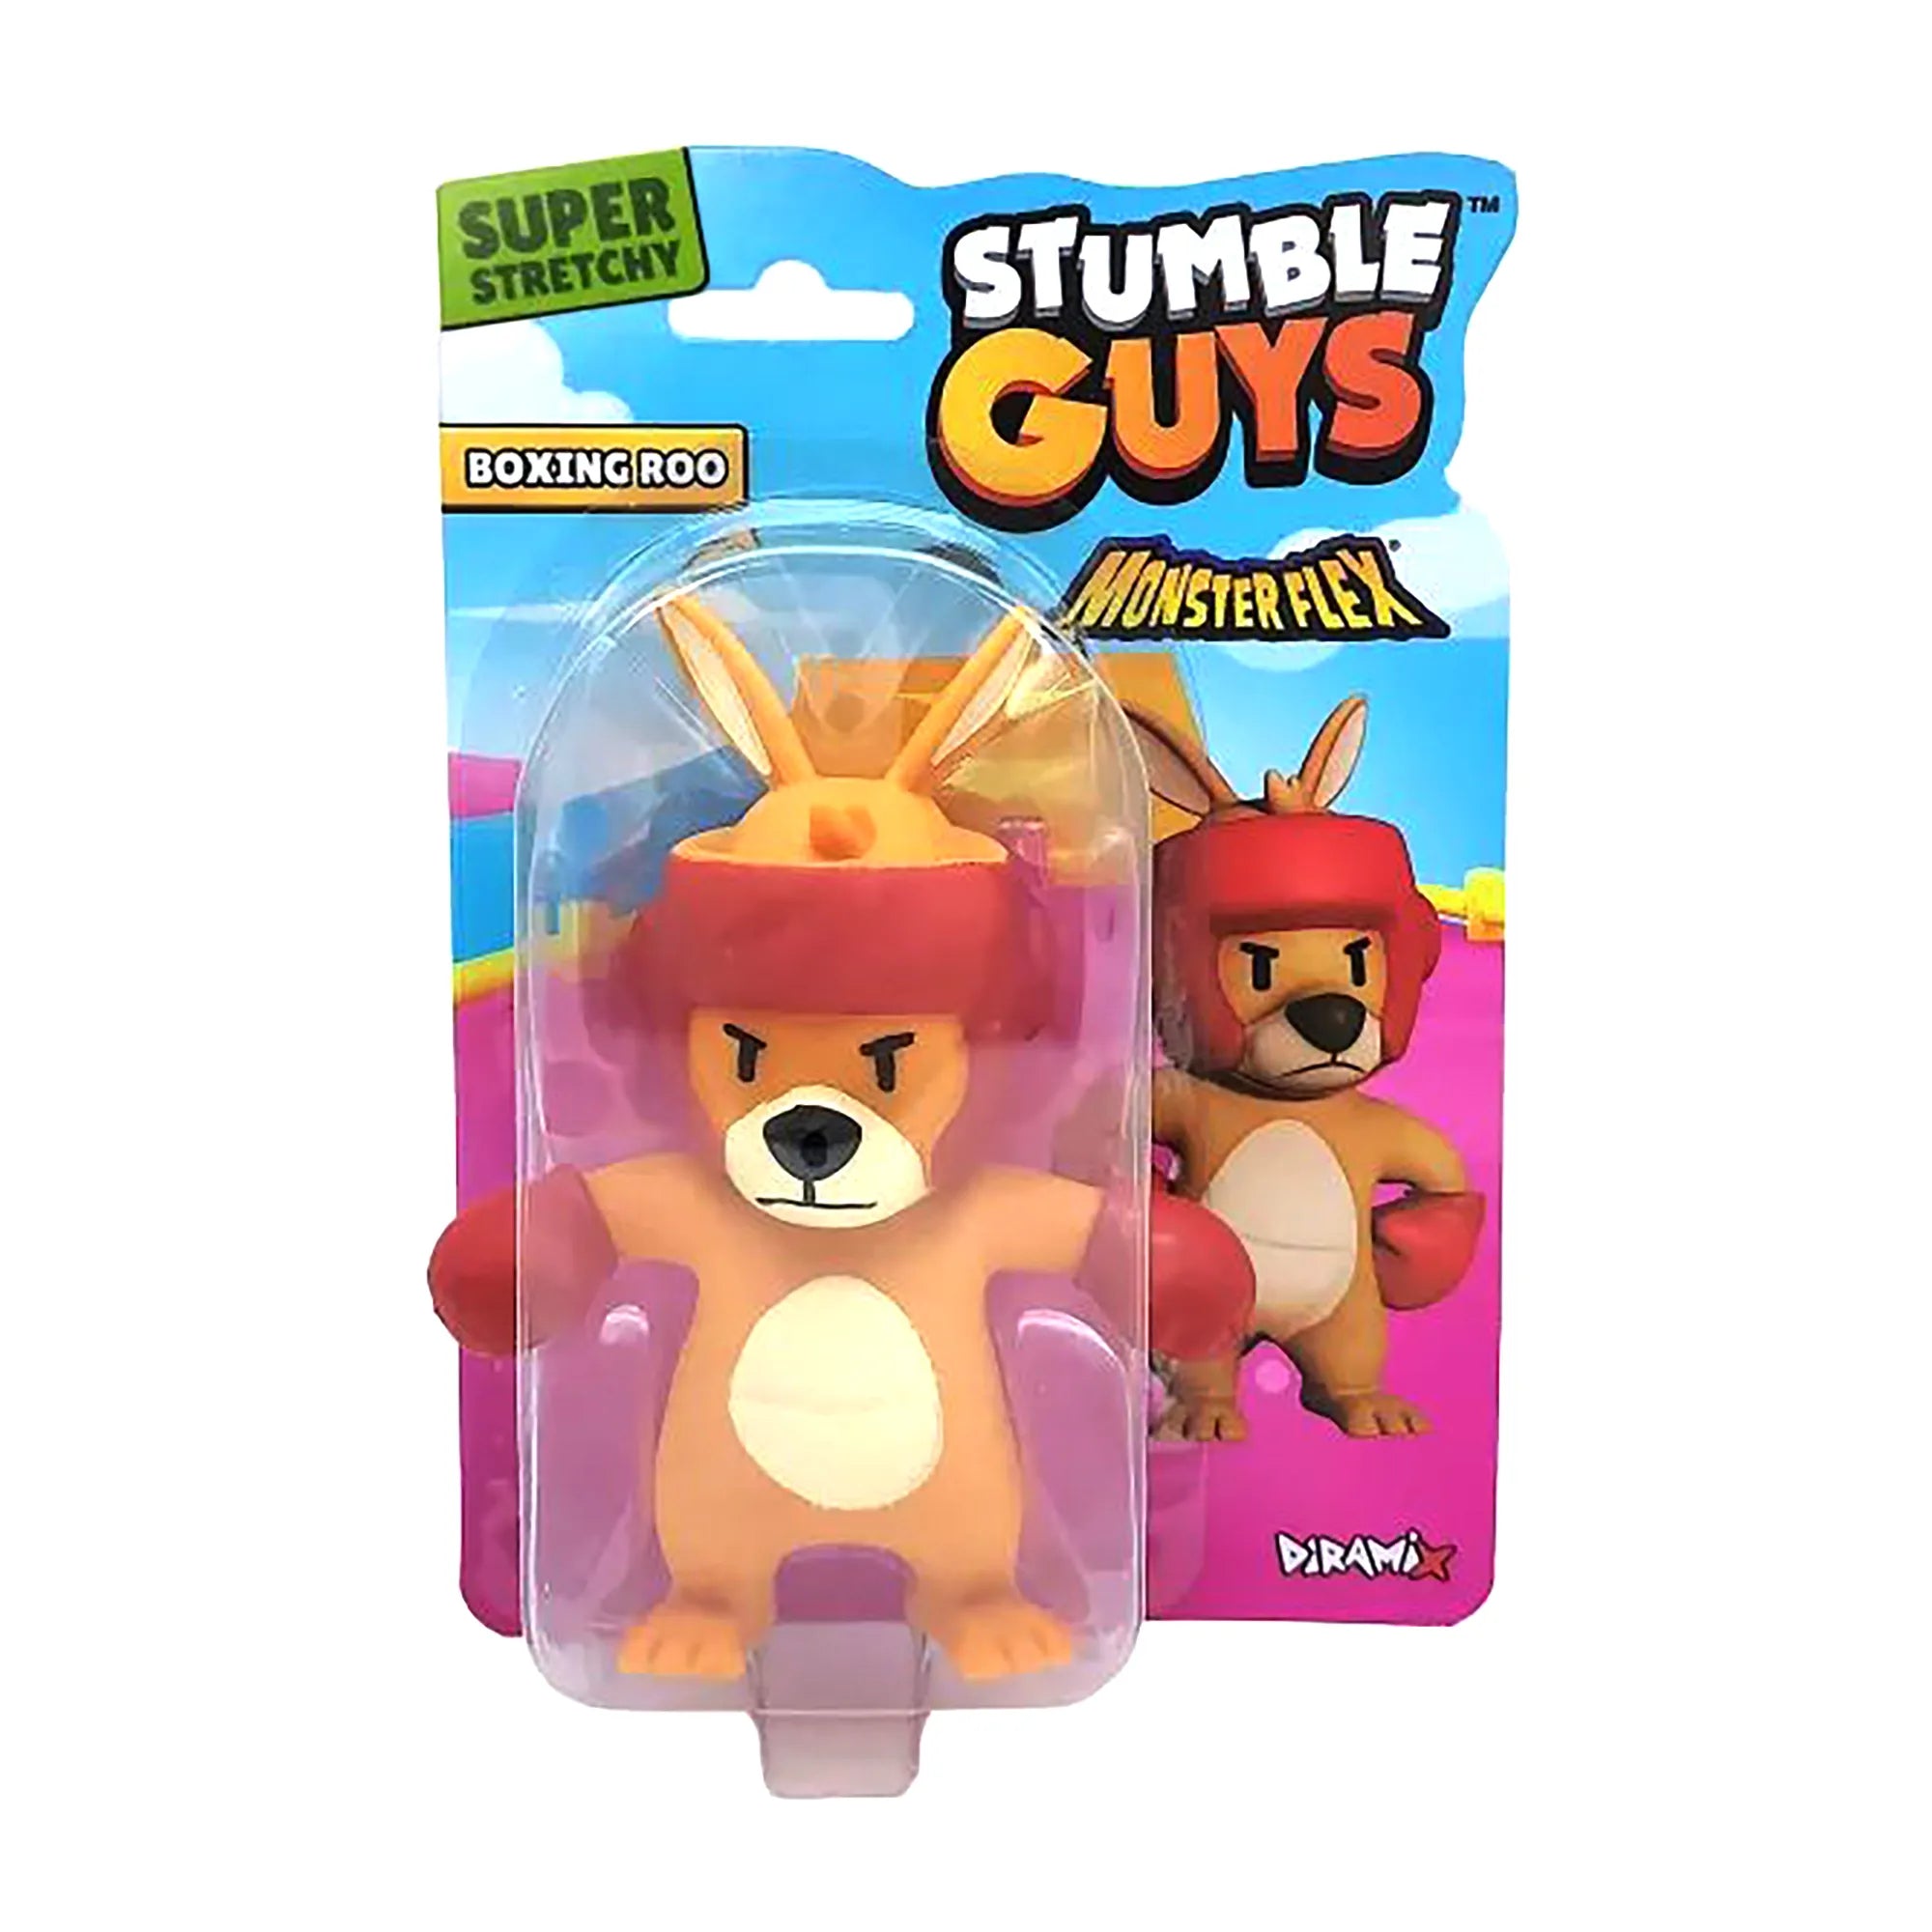 Stumble Guys Monster Flex - Boxing Roo - Collectible - Ages 6-Adult - Brown's Hobby & Game